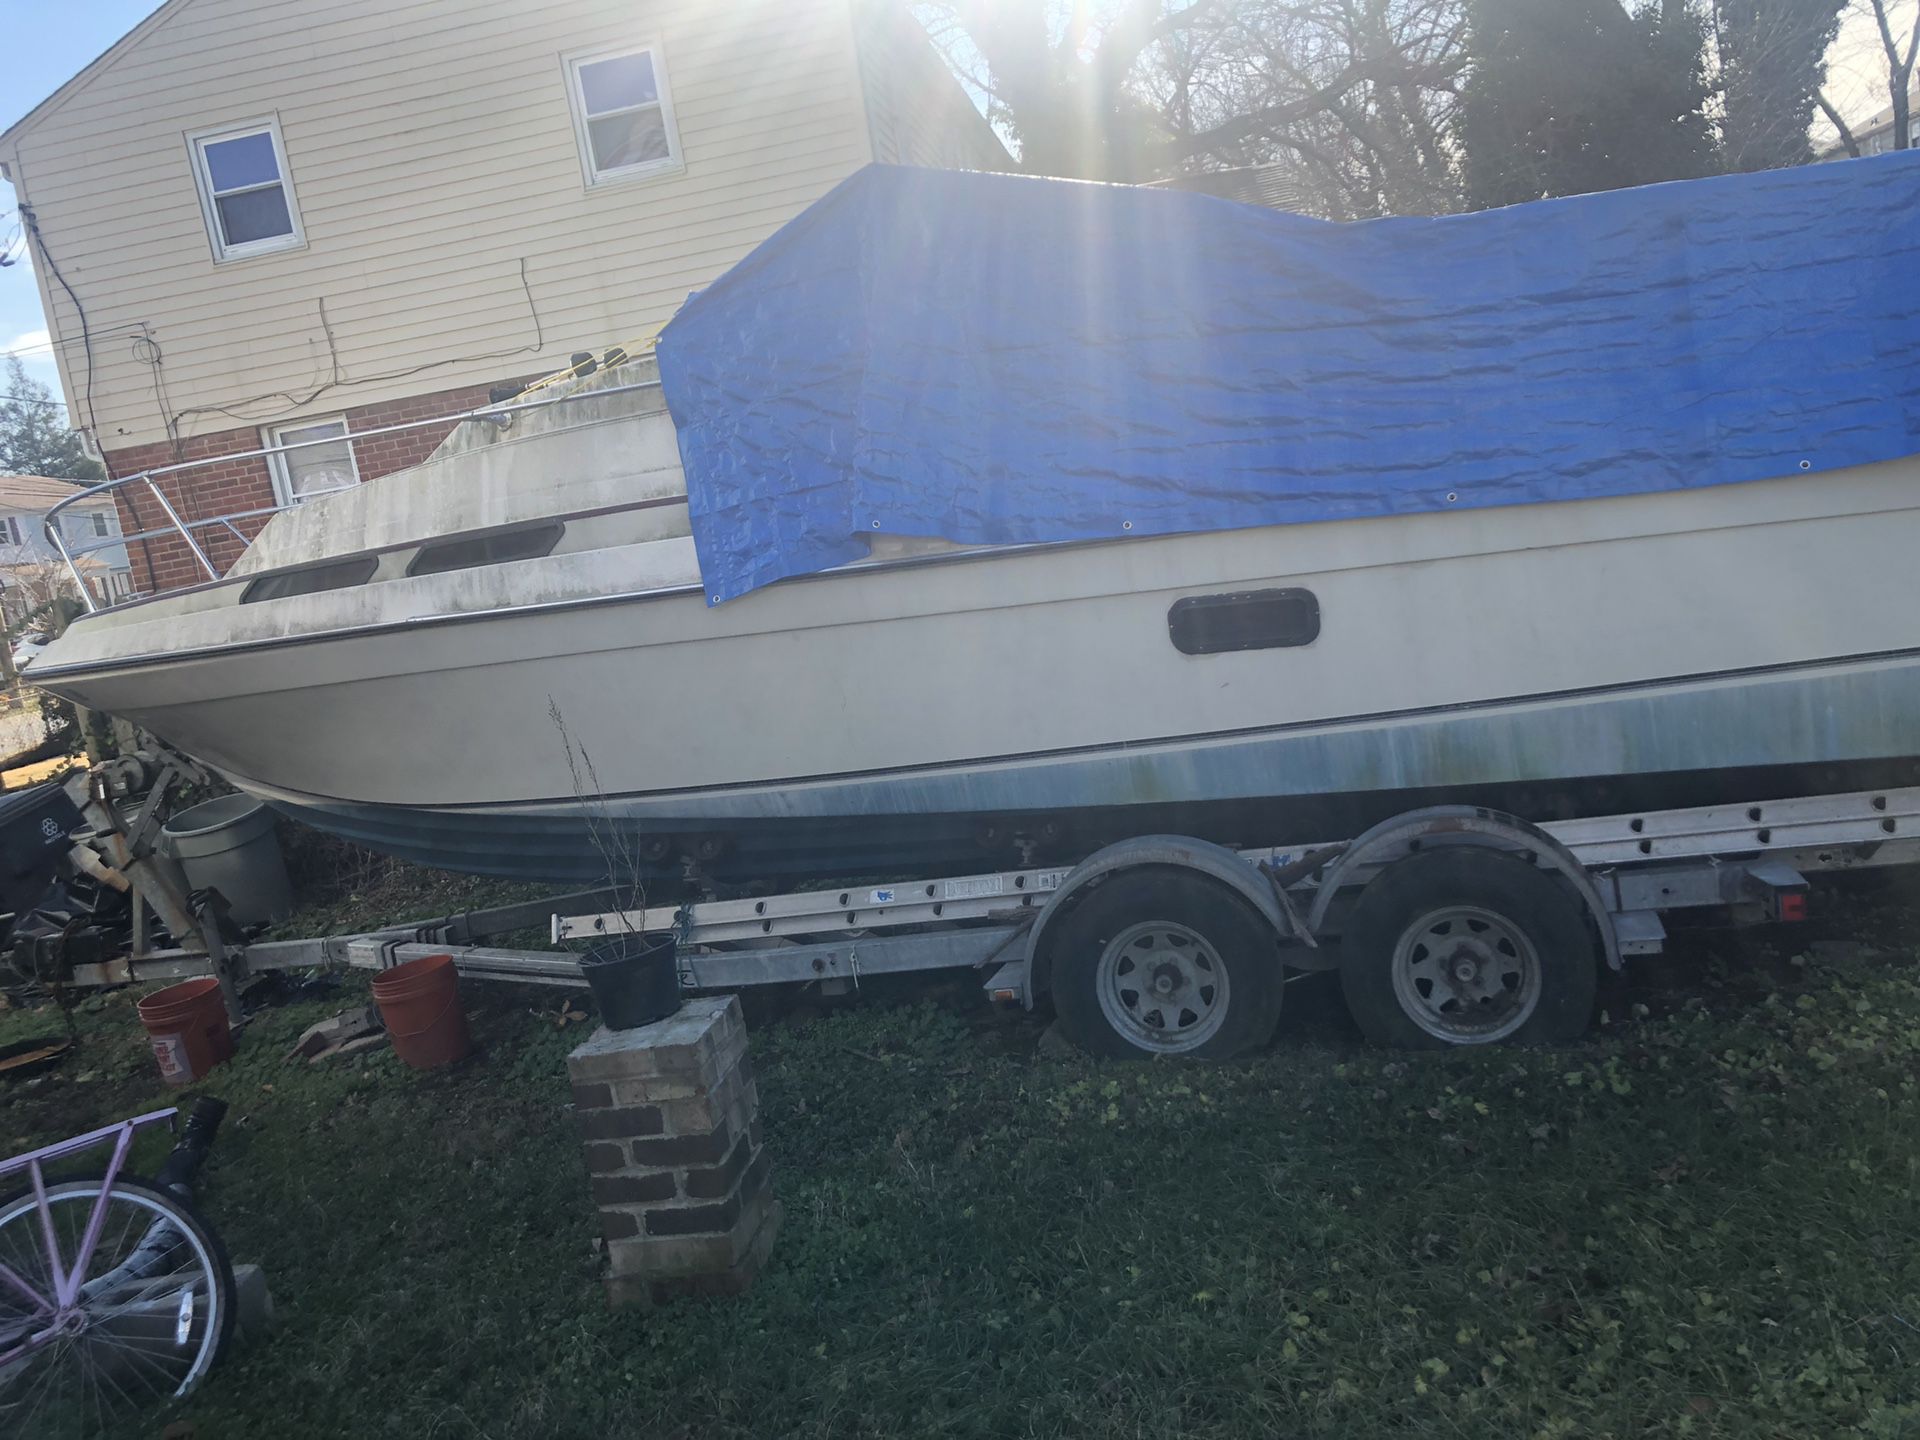 Boat for sale need gone today